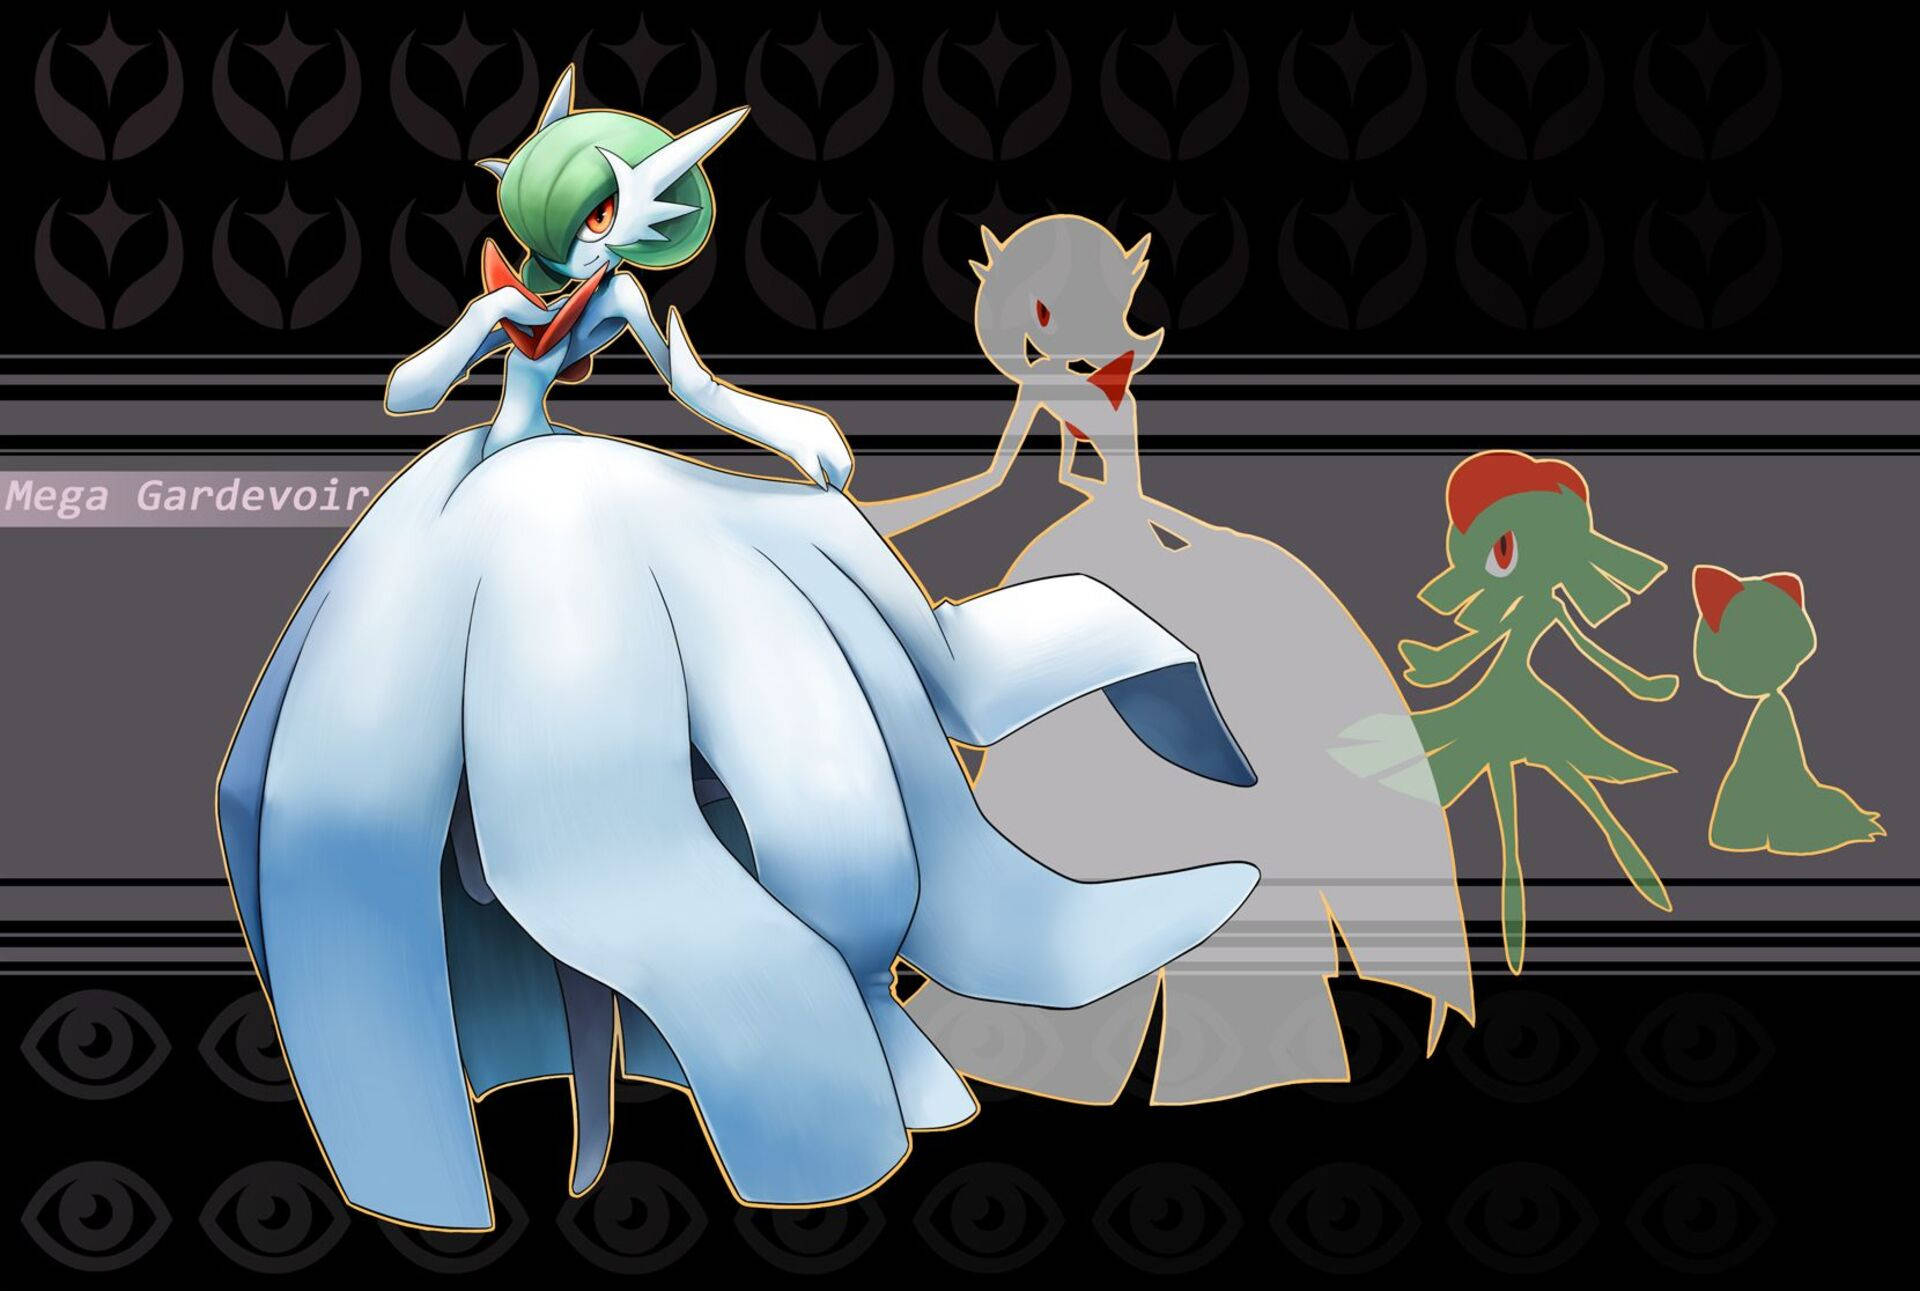 Becoming a Gardevoir – The Evolution of the Ralts Wallpaper